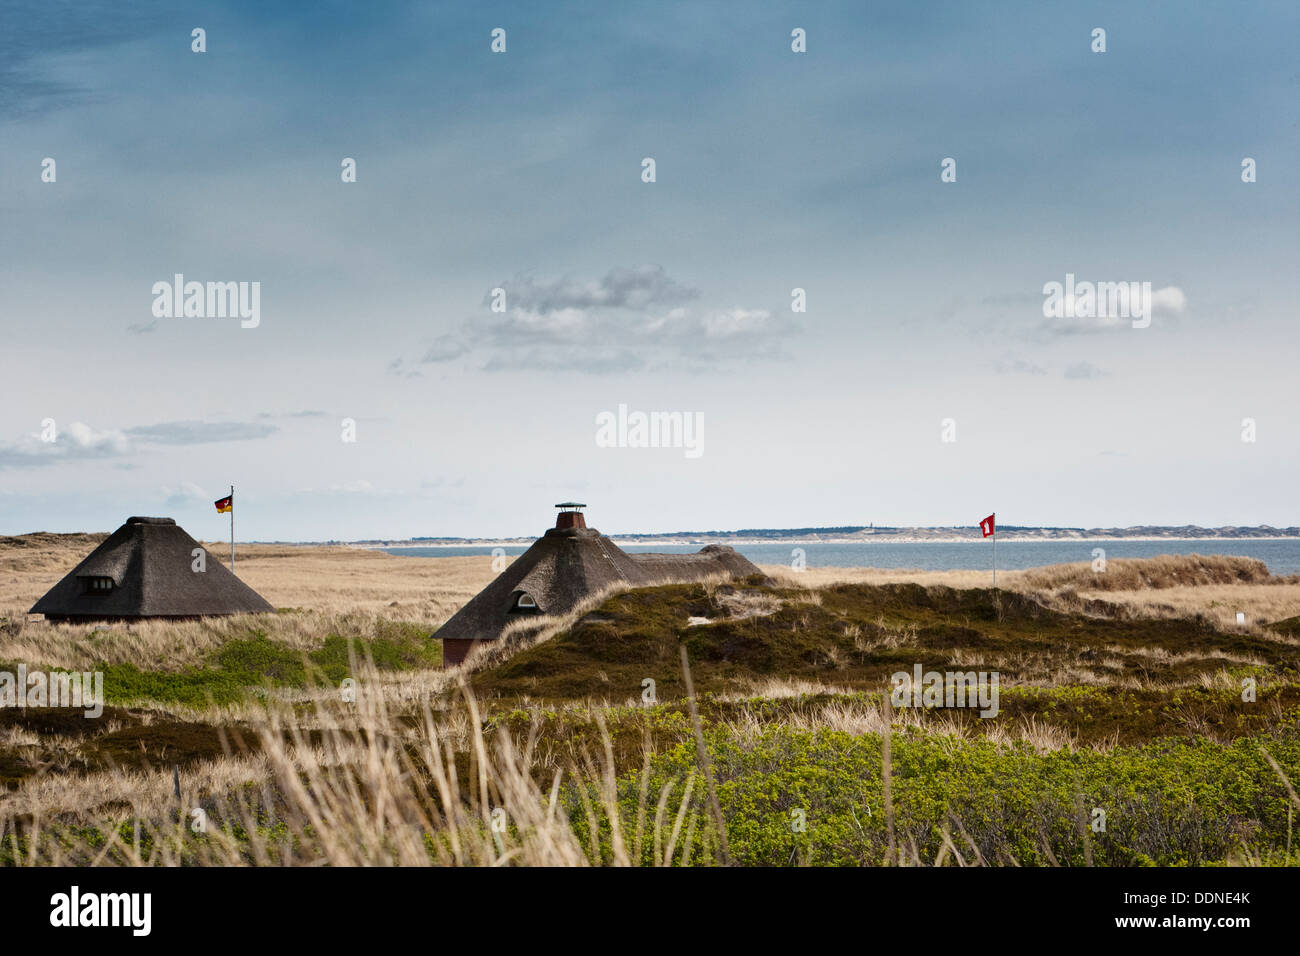 Thatched houses in Hoernum, Sylt, with view to Amrum, Schleswig-Holstein, Germany Stock Photo